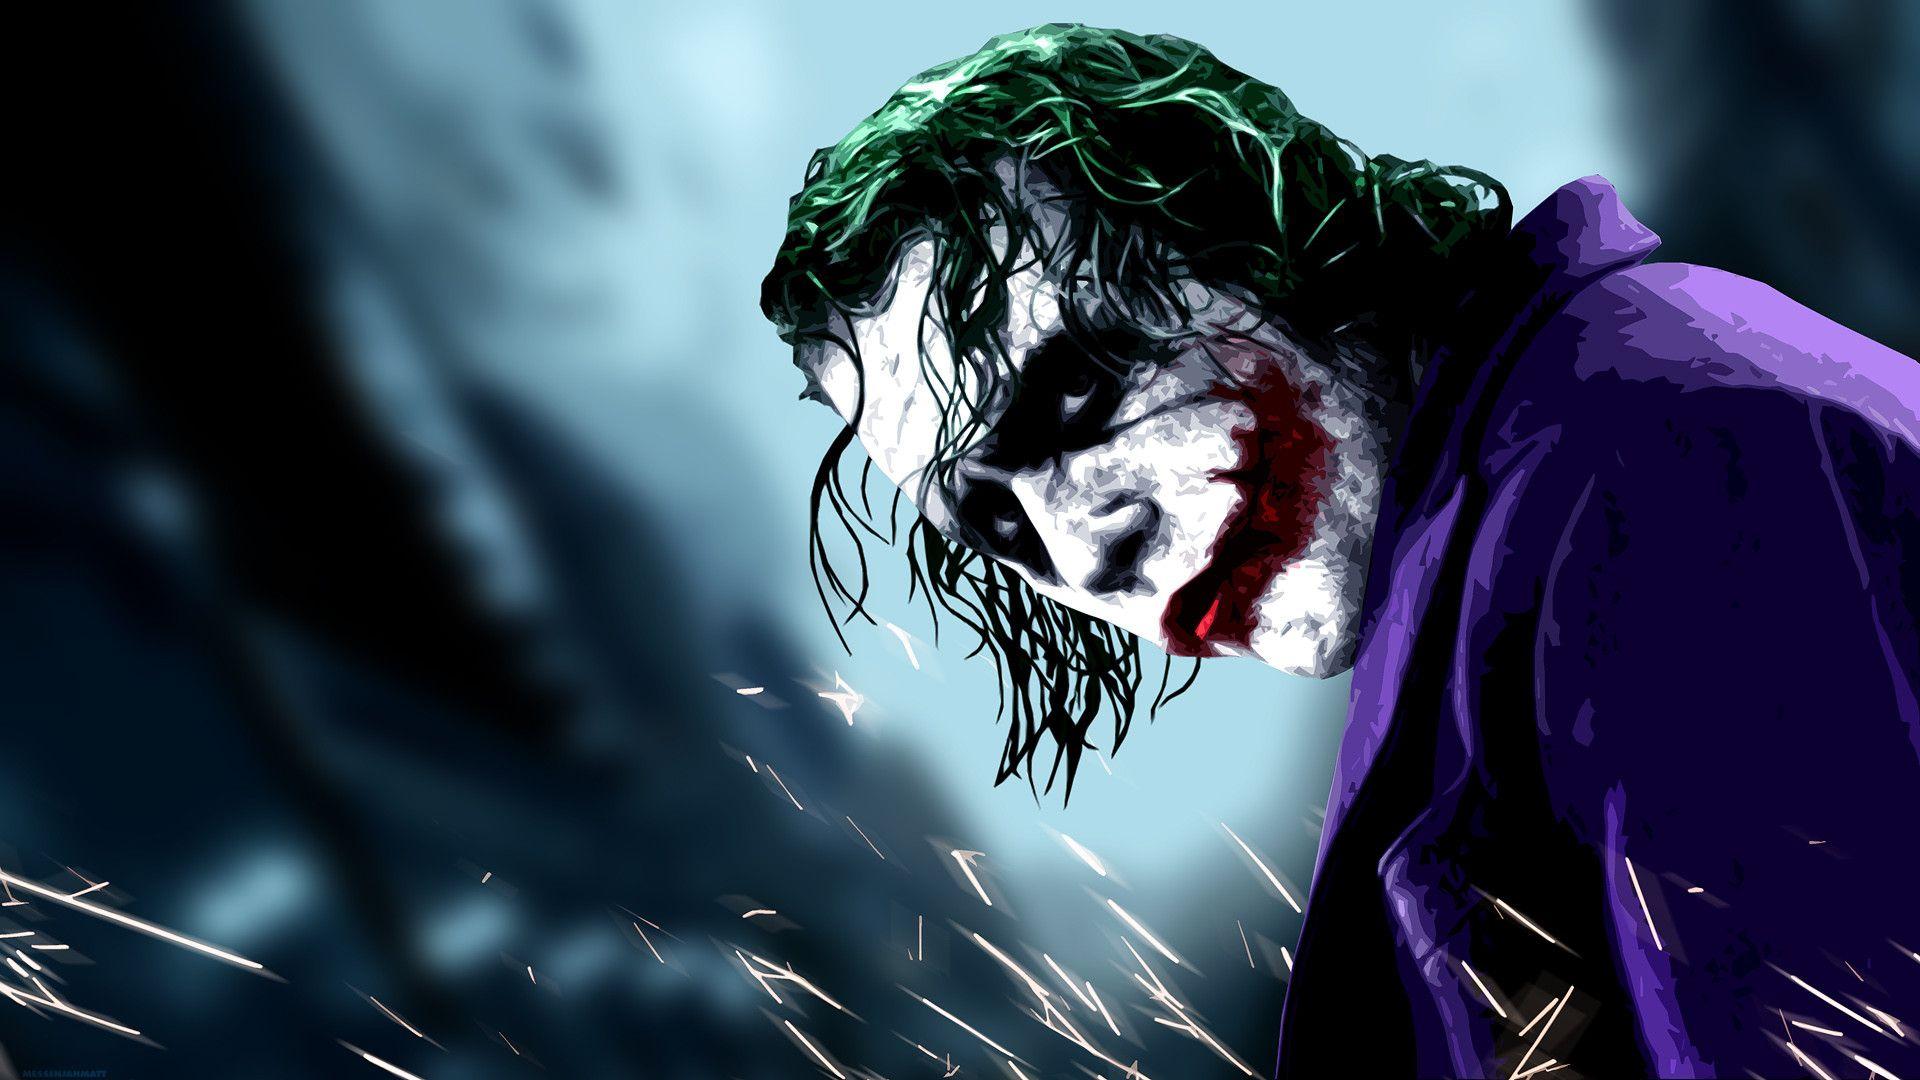 Download Free 85 Joker Wallpaper (The Dark Knight). The Quotes Land